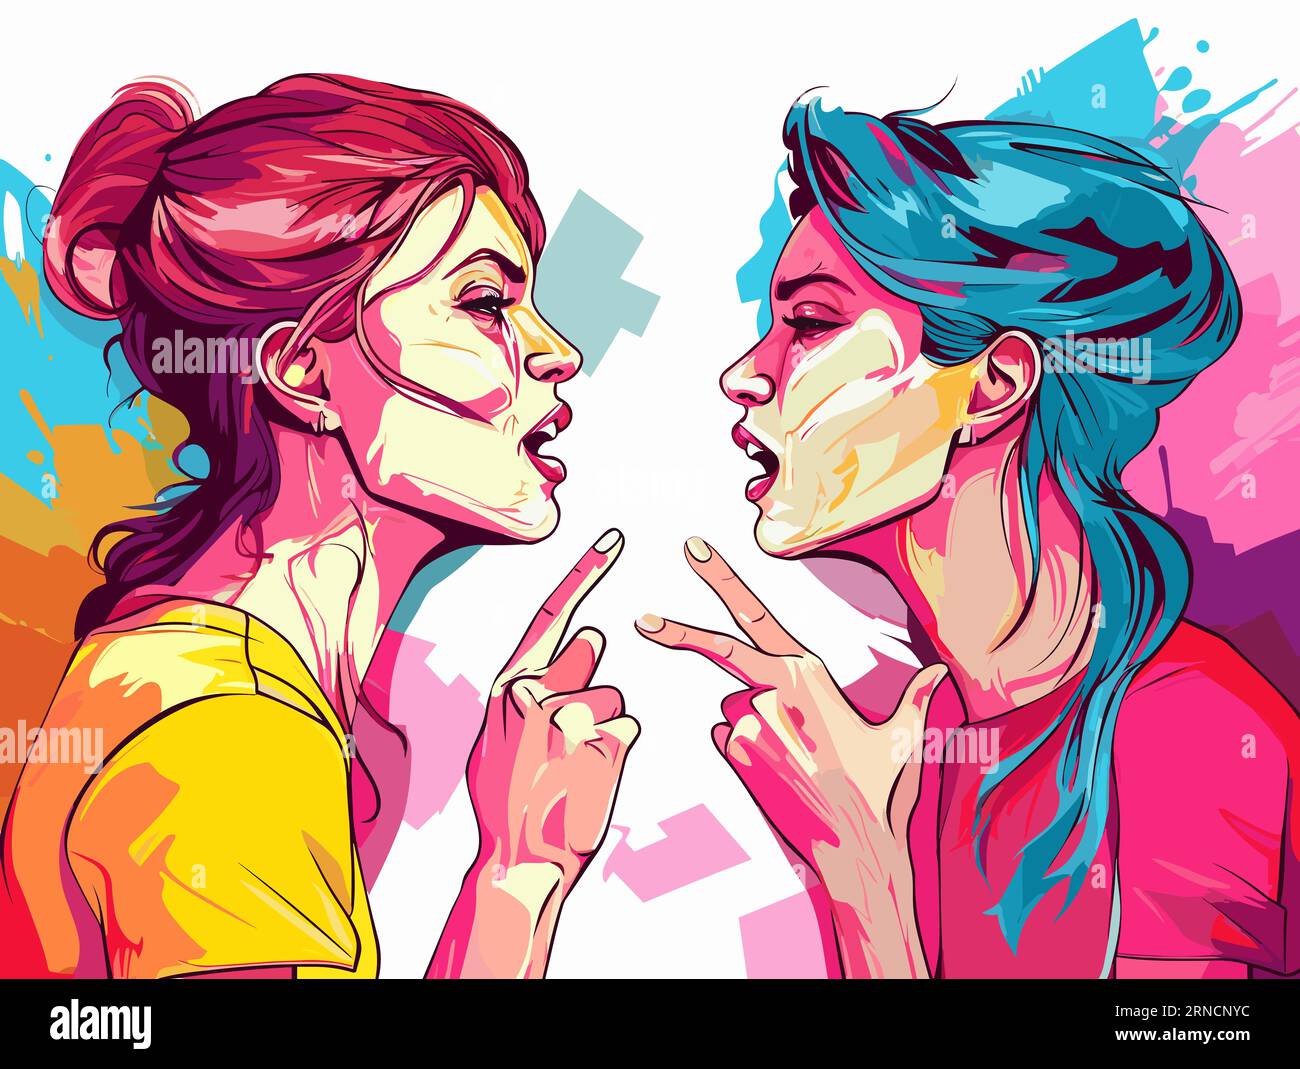 Two Women Showing Off Colorful Art, In The Style Of Aggressive Digital Illustration, Emphasizes Emotion Over Realism, Graphical Punch, Light Cyan And Stock Vector